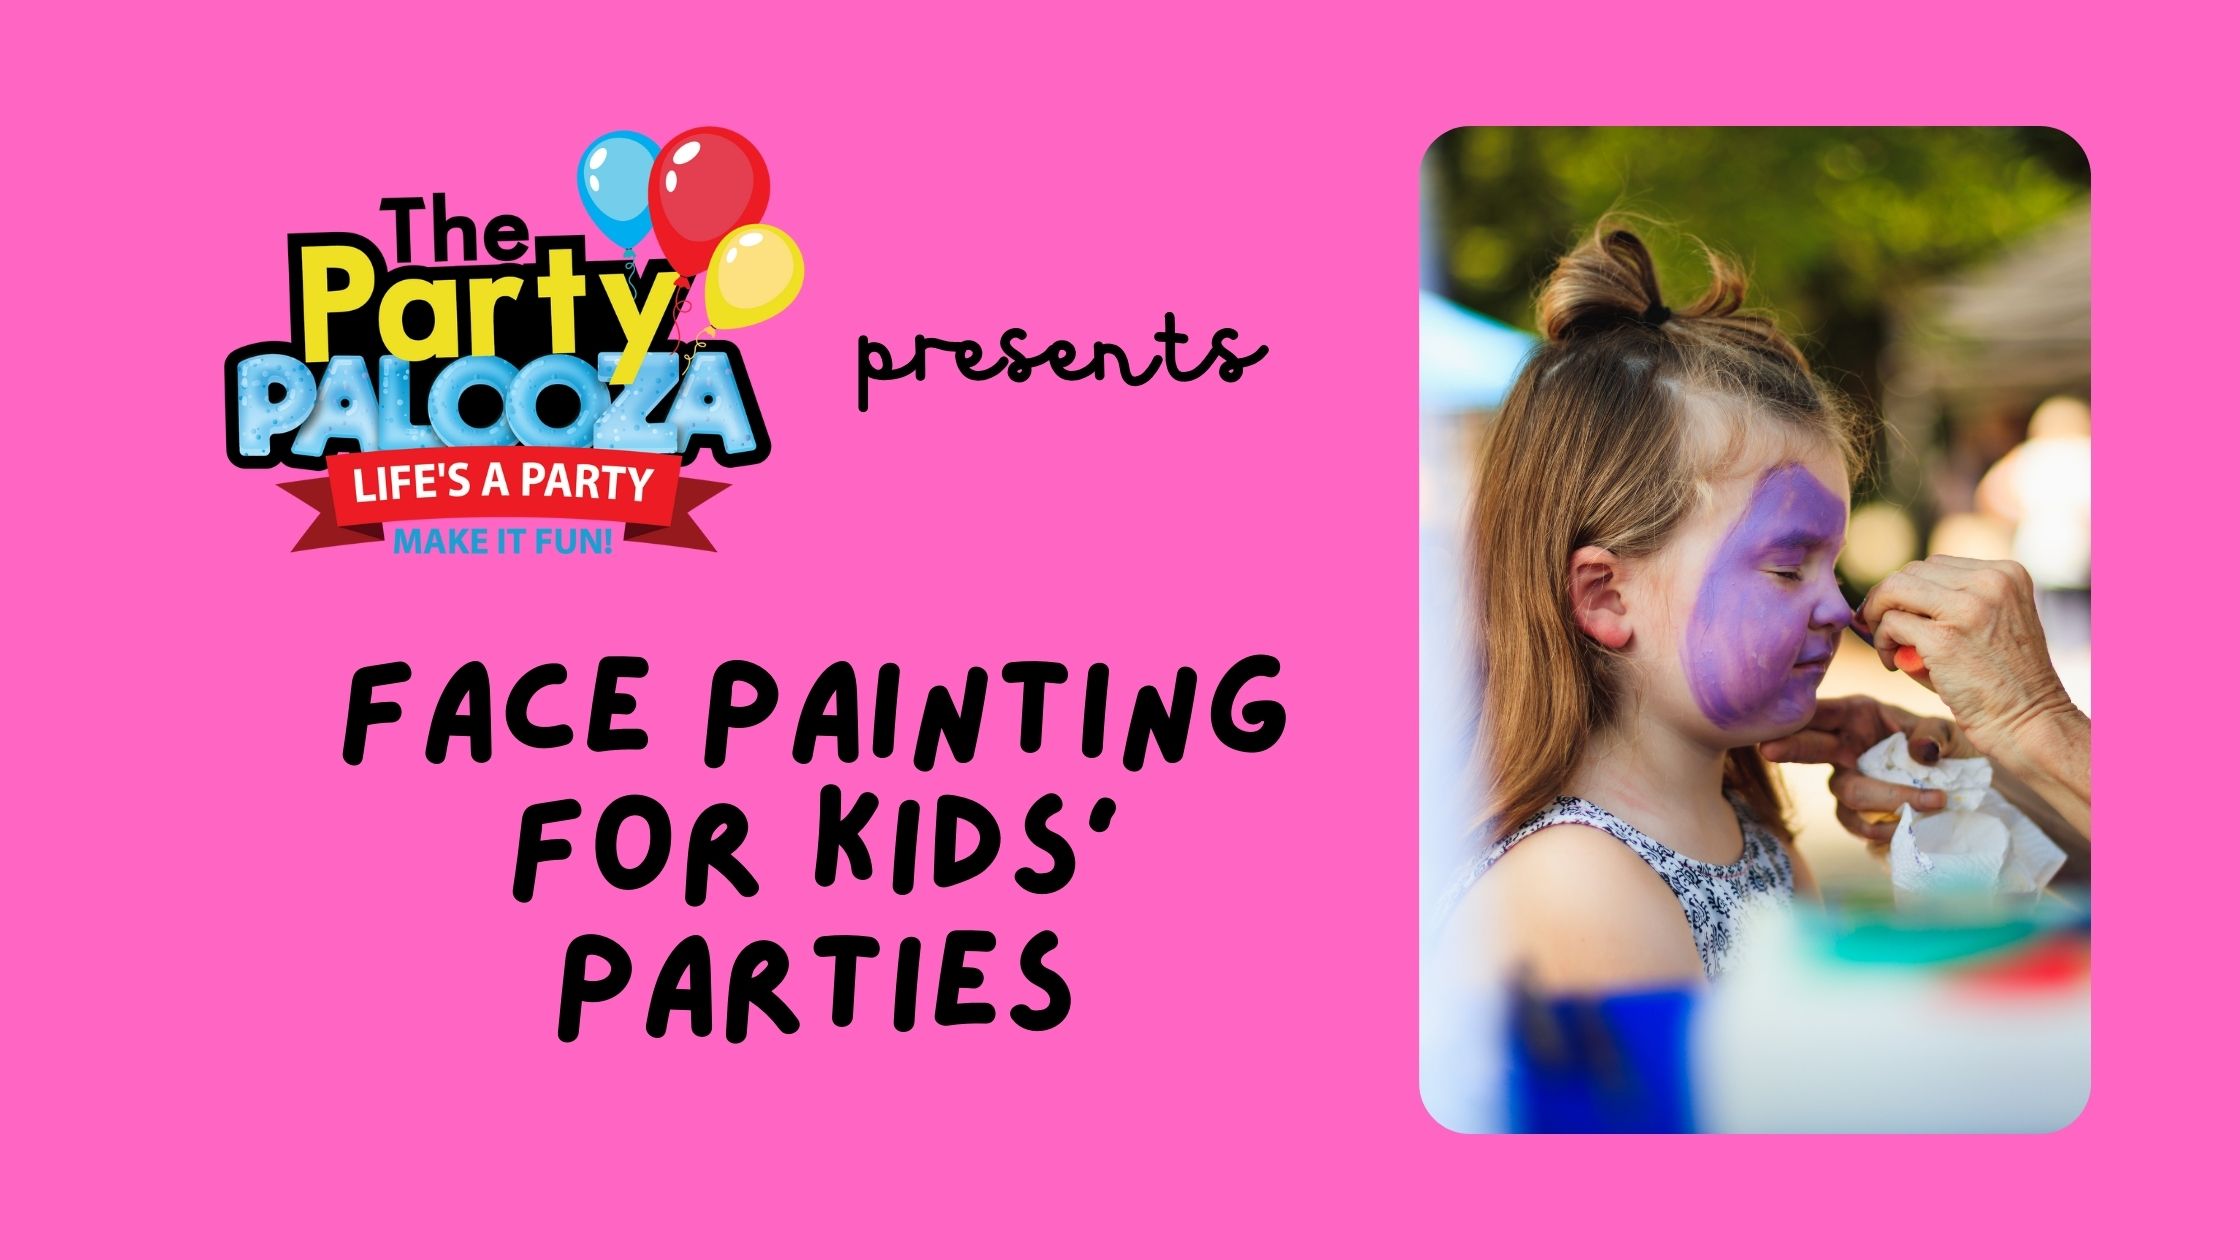 Face Painting for Kids' Parties: The Basic Guidelines - The Party